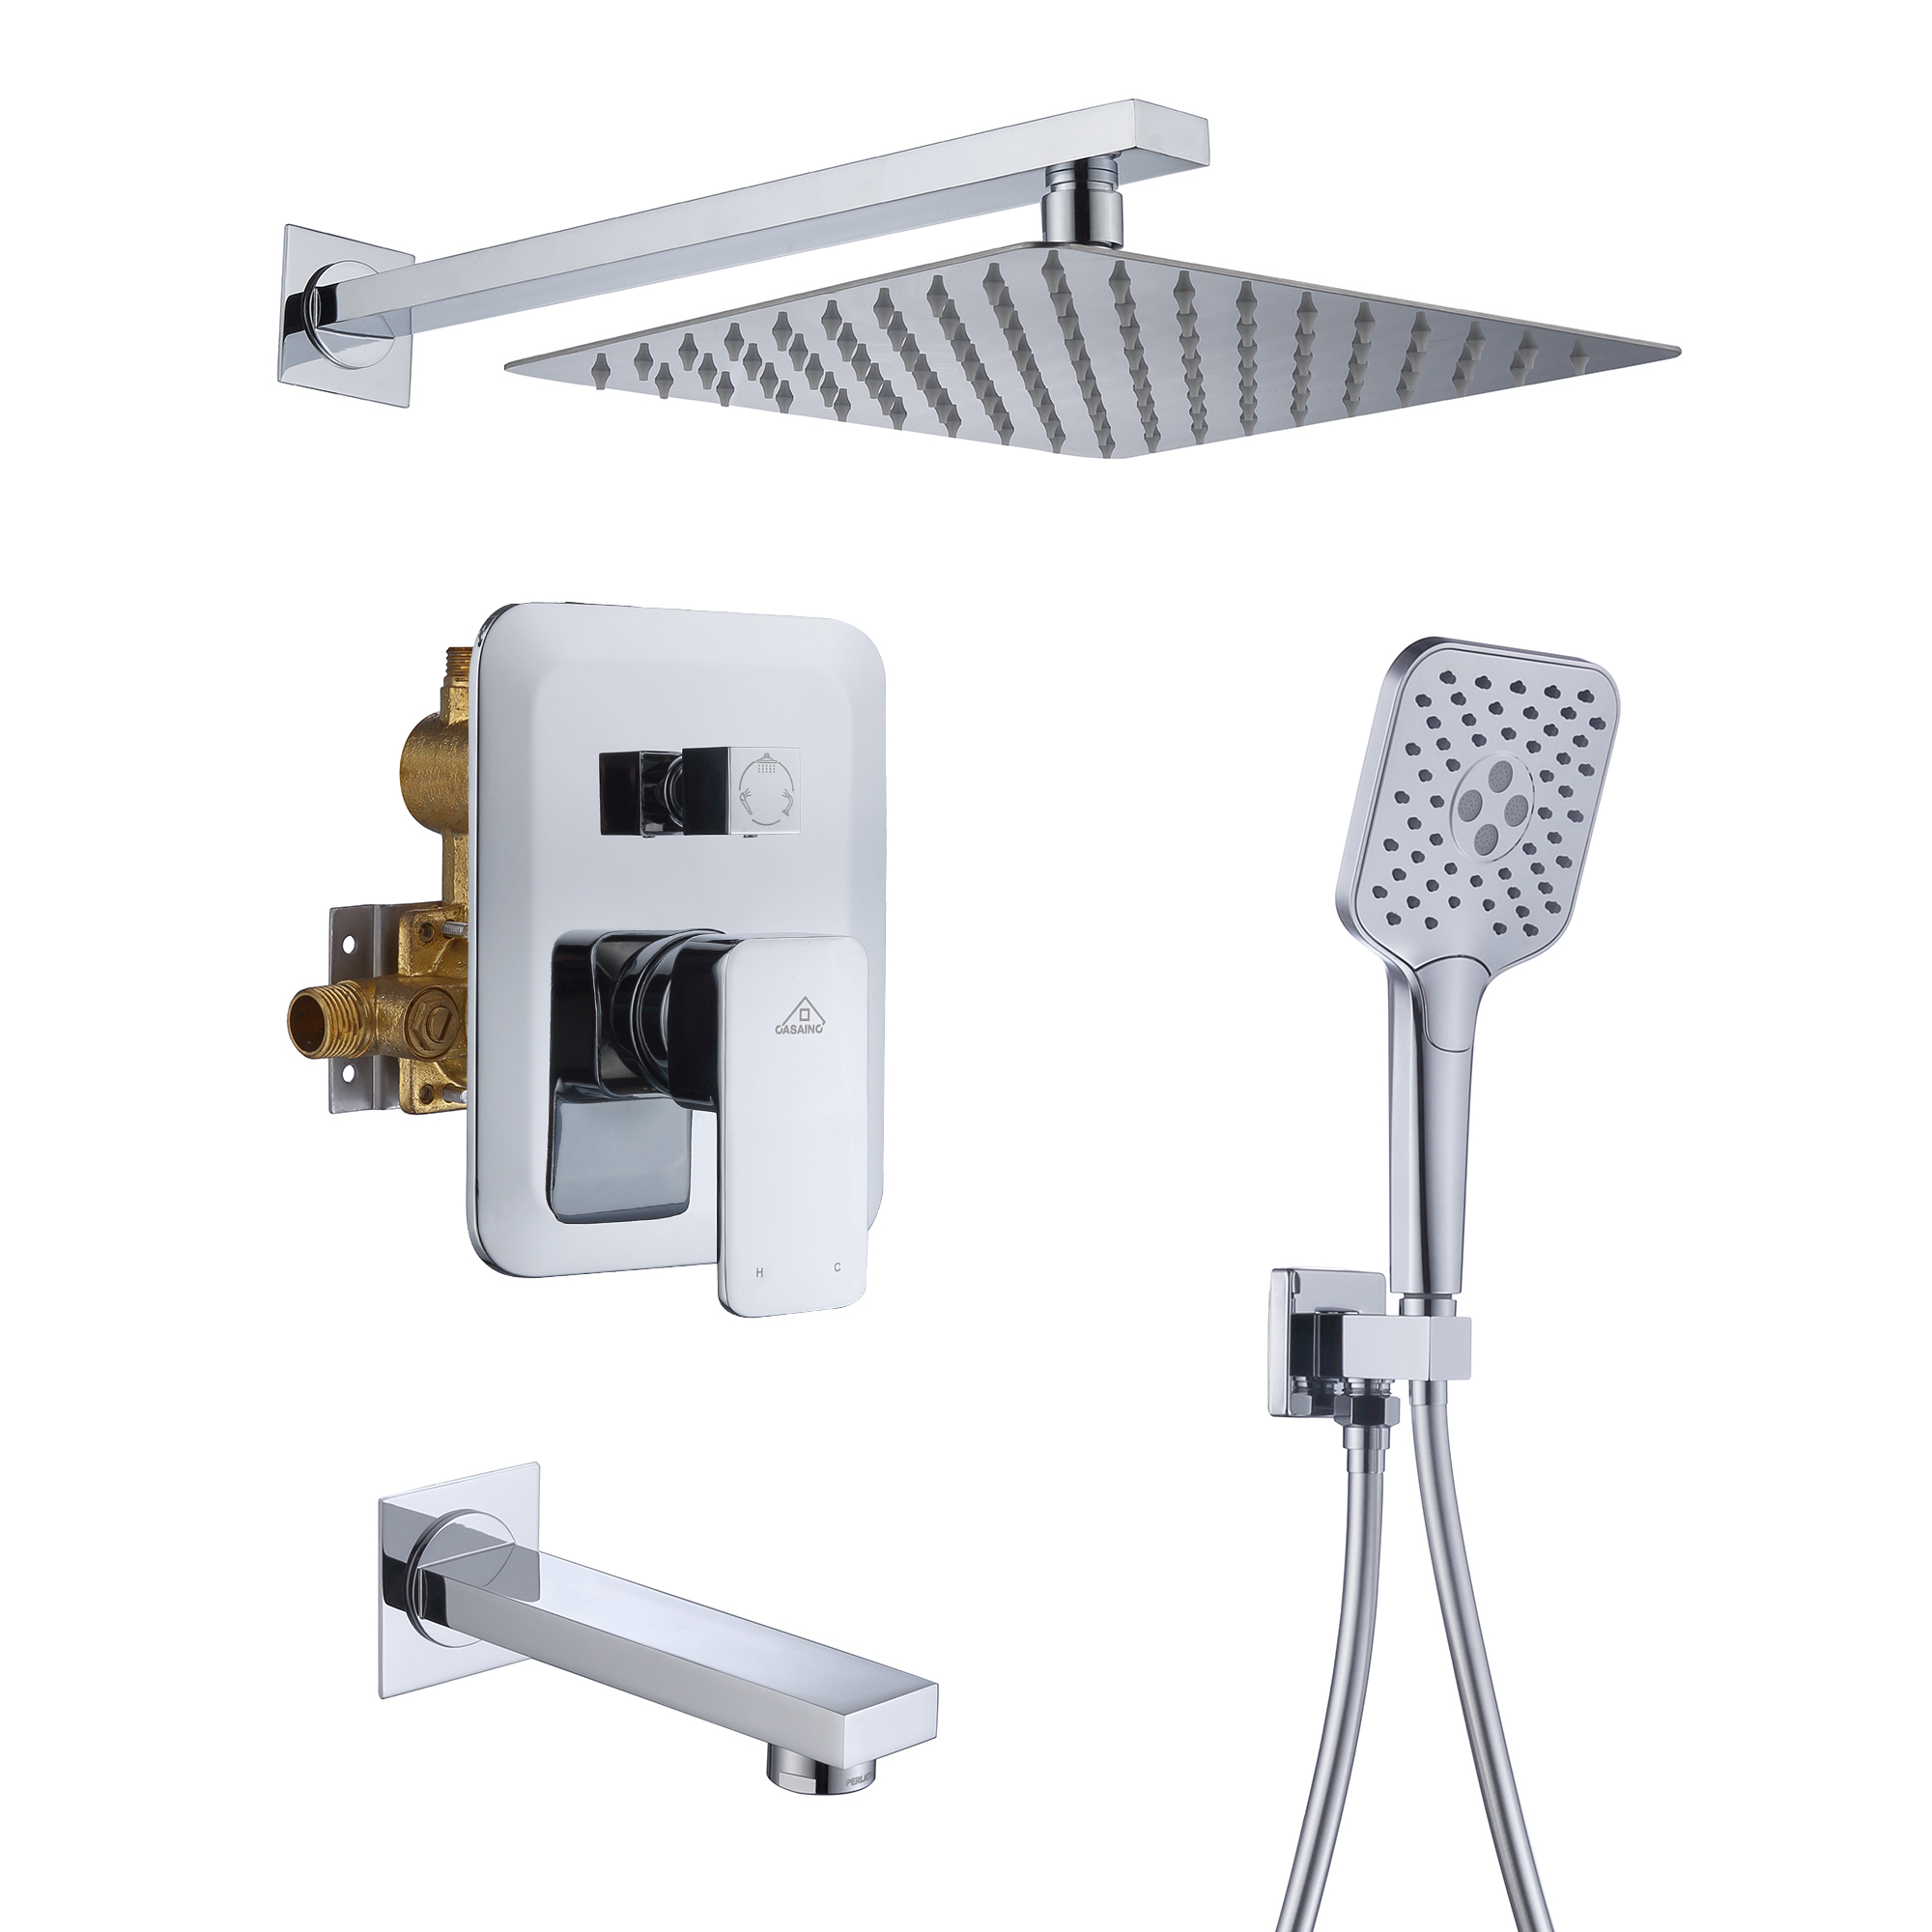 CASAINC 10 inch Square Wall-mounted rain shower faucet with pressure balanced valve